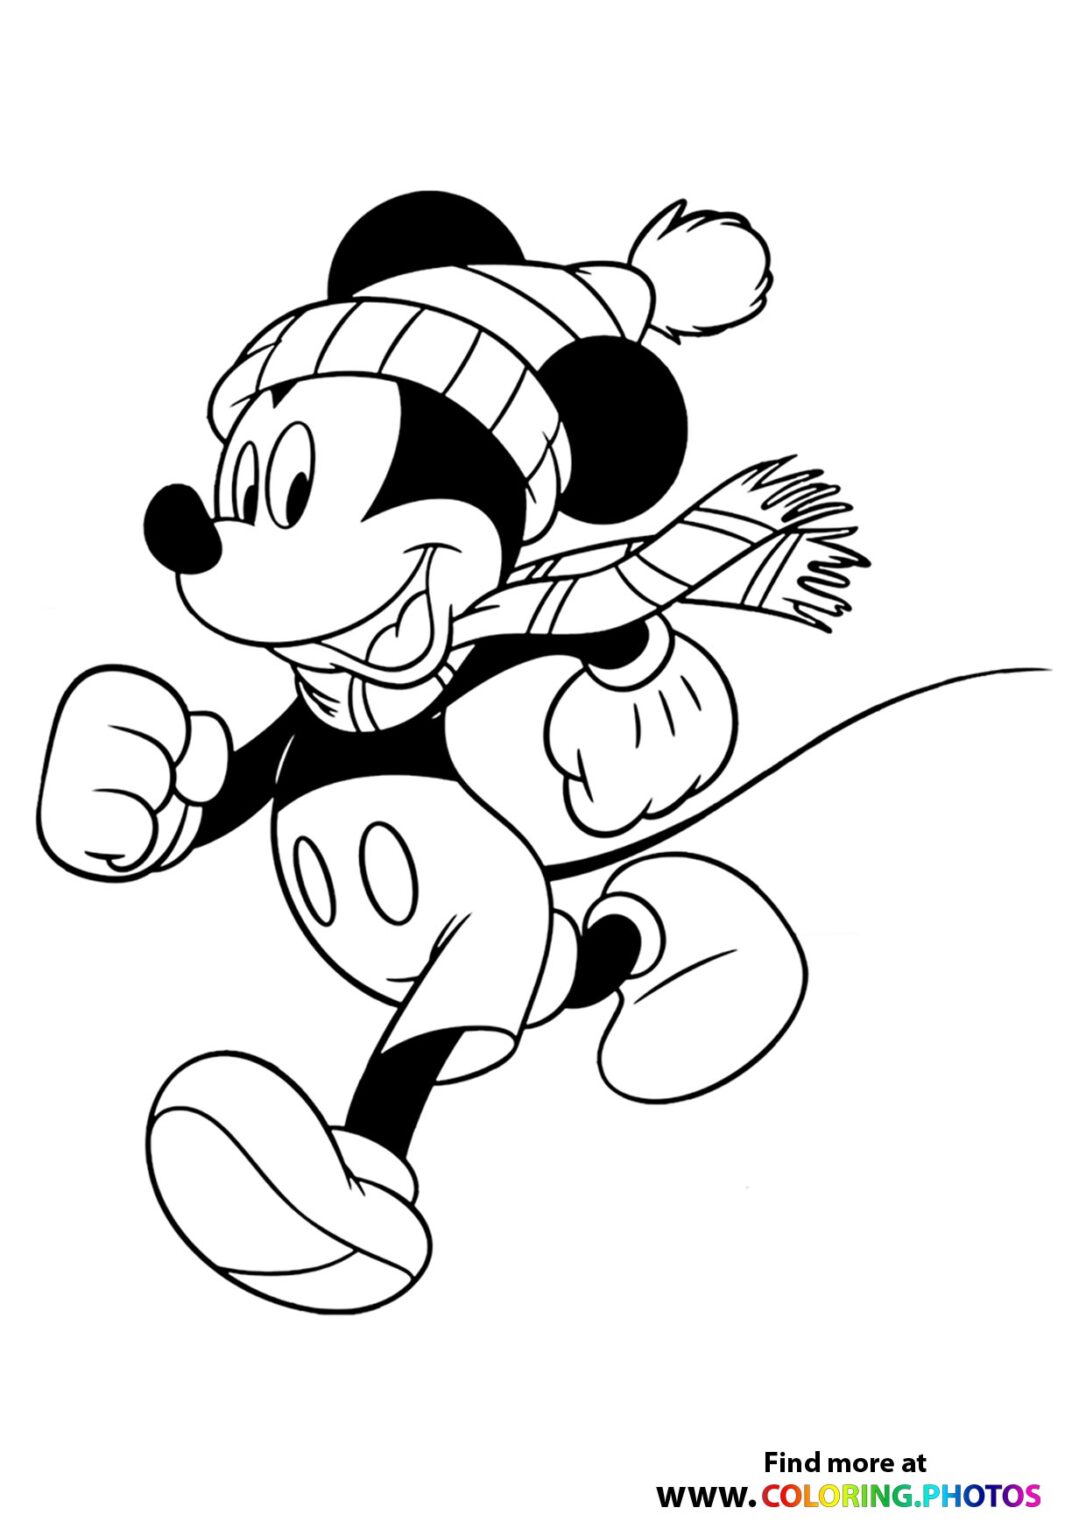 Mickey Mouse - Coloring Pages for kids | Free and easy print or download